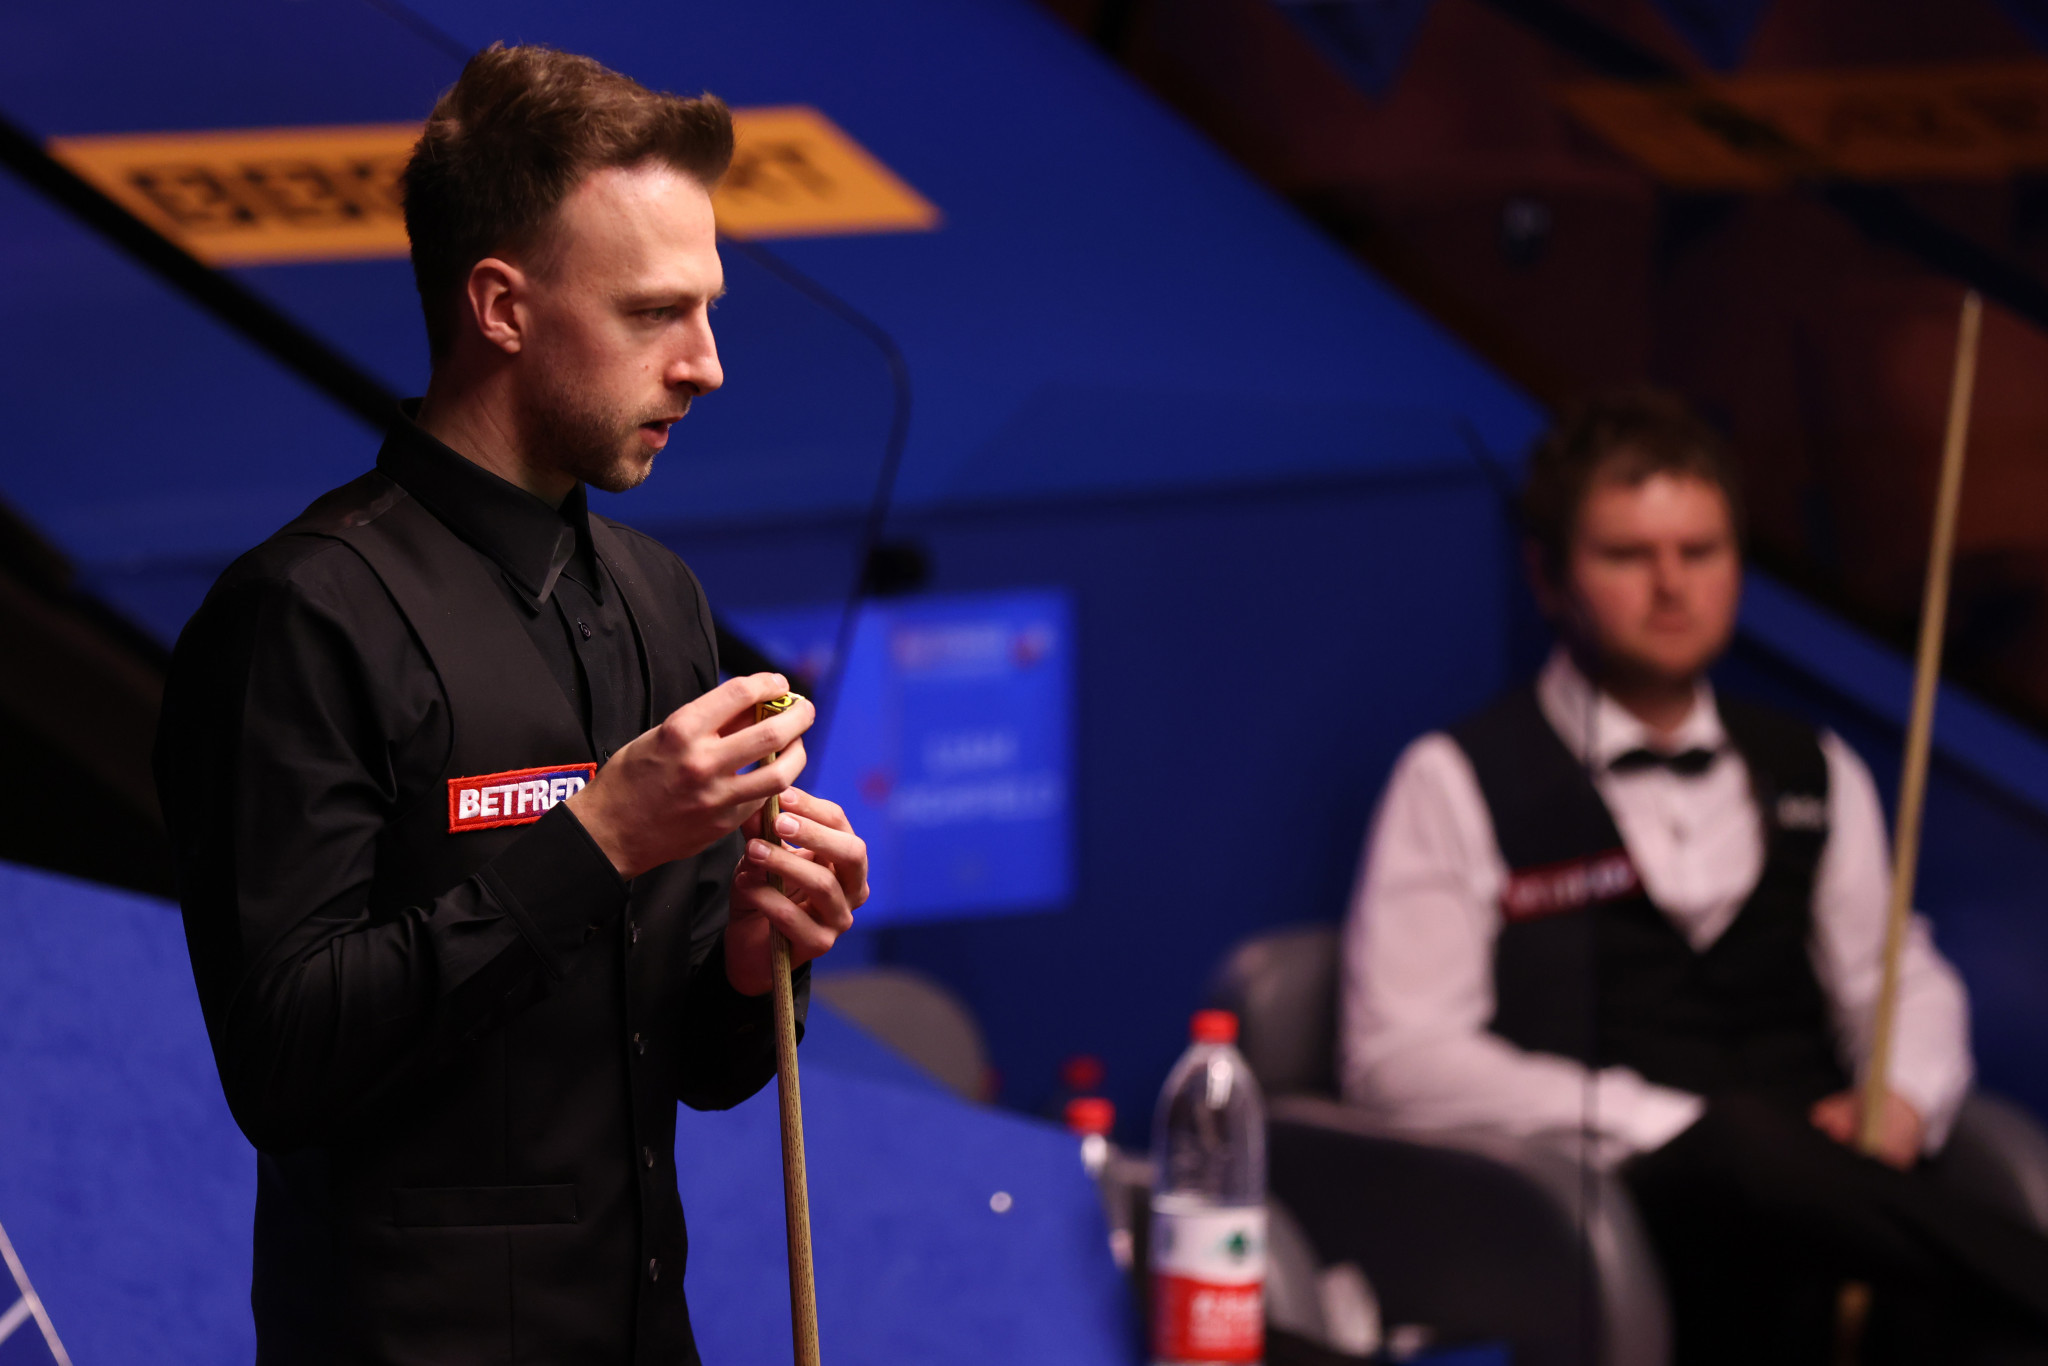 Judd Trump made a string start at the Crucible Theatre in Sheffield ©Getty Images